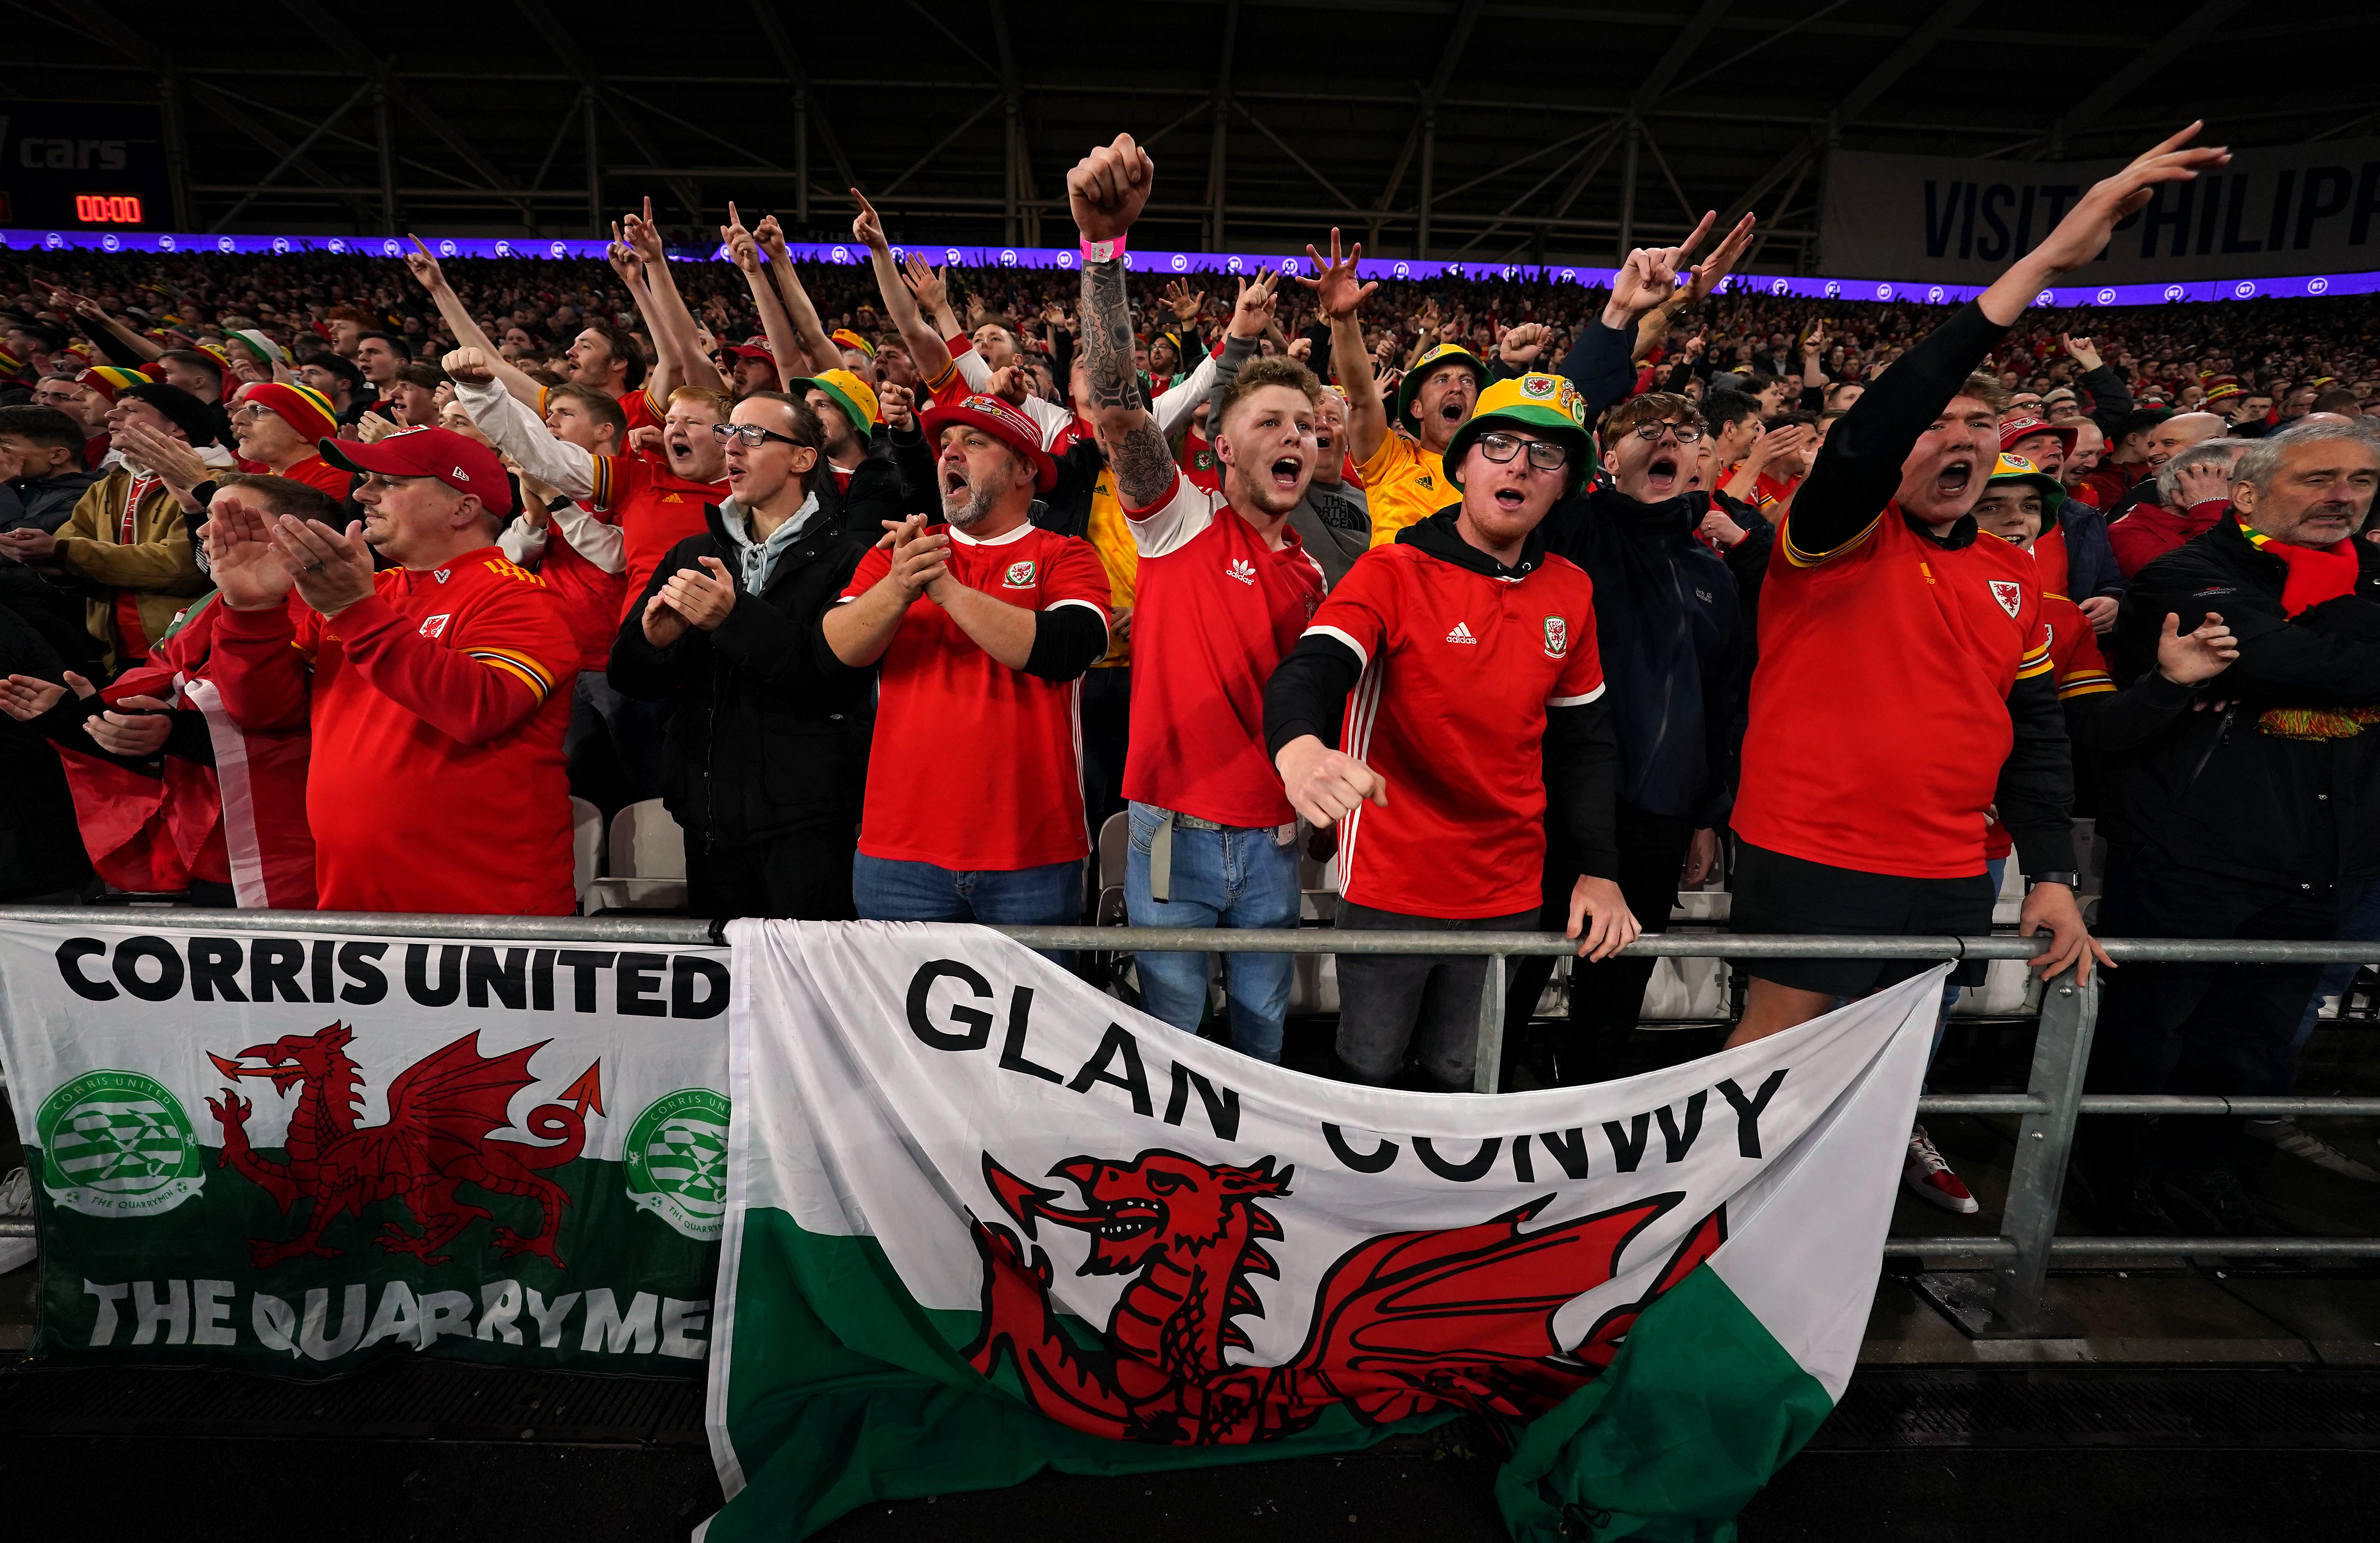 Wales football fans have been told they face criminal proceedings if they invade the pitch after Sunday’s World Cup play-off final (David Davies/PA)